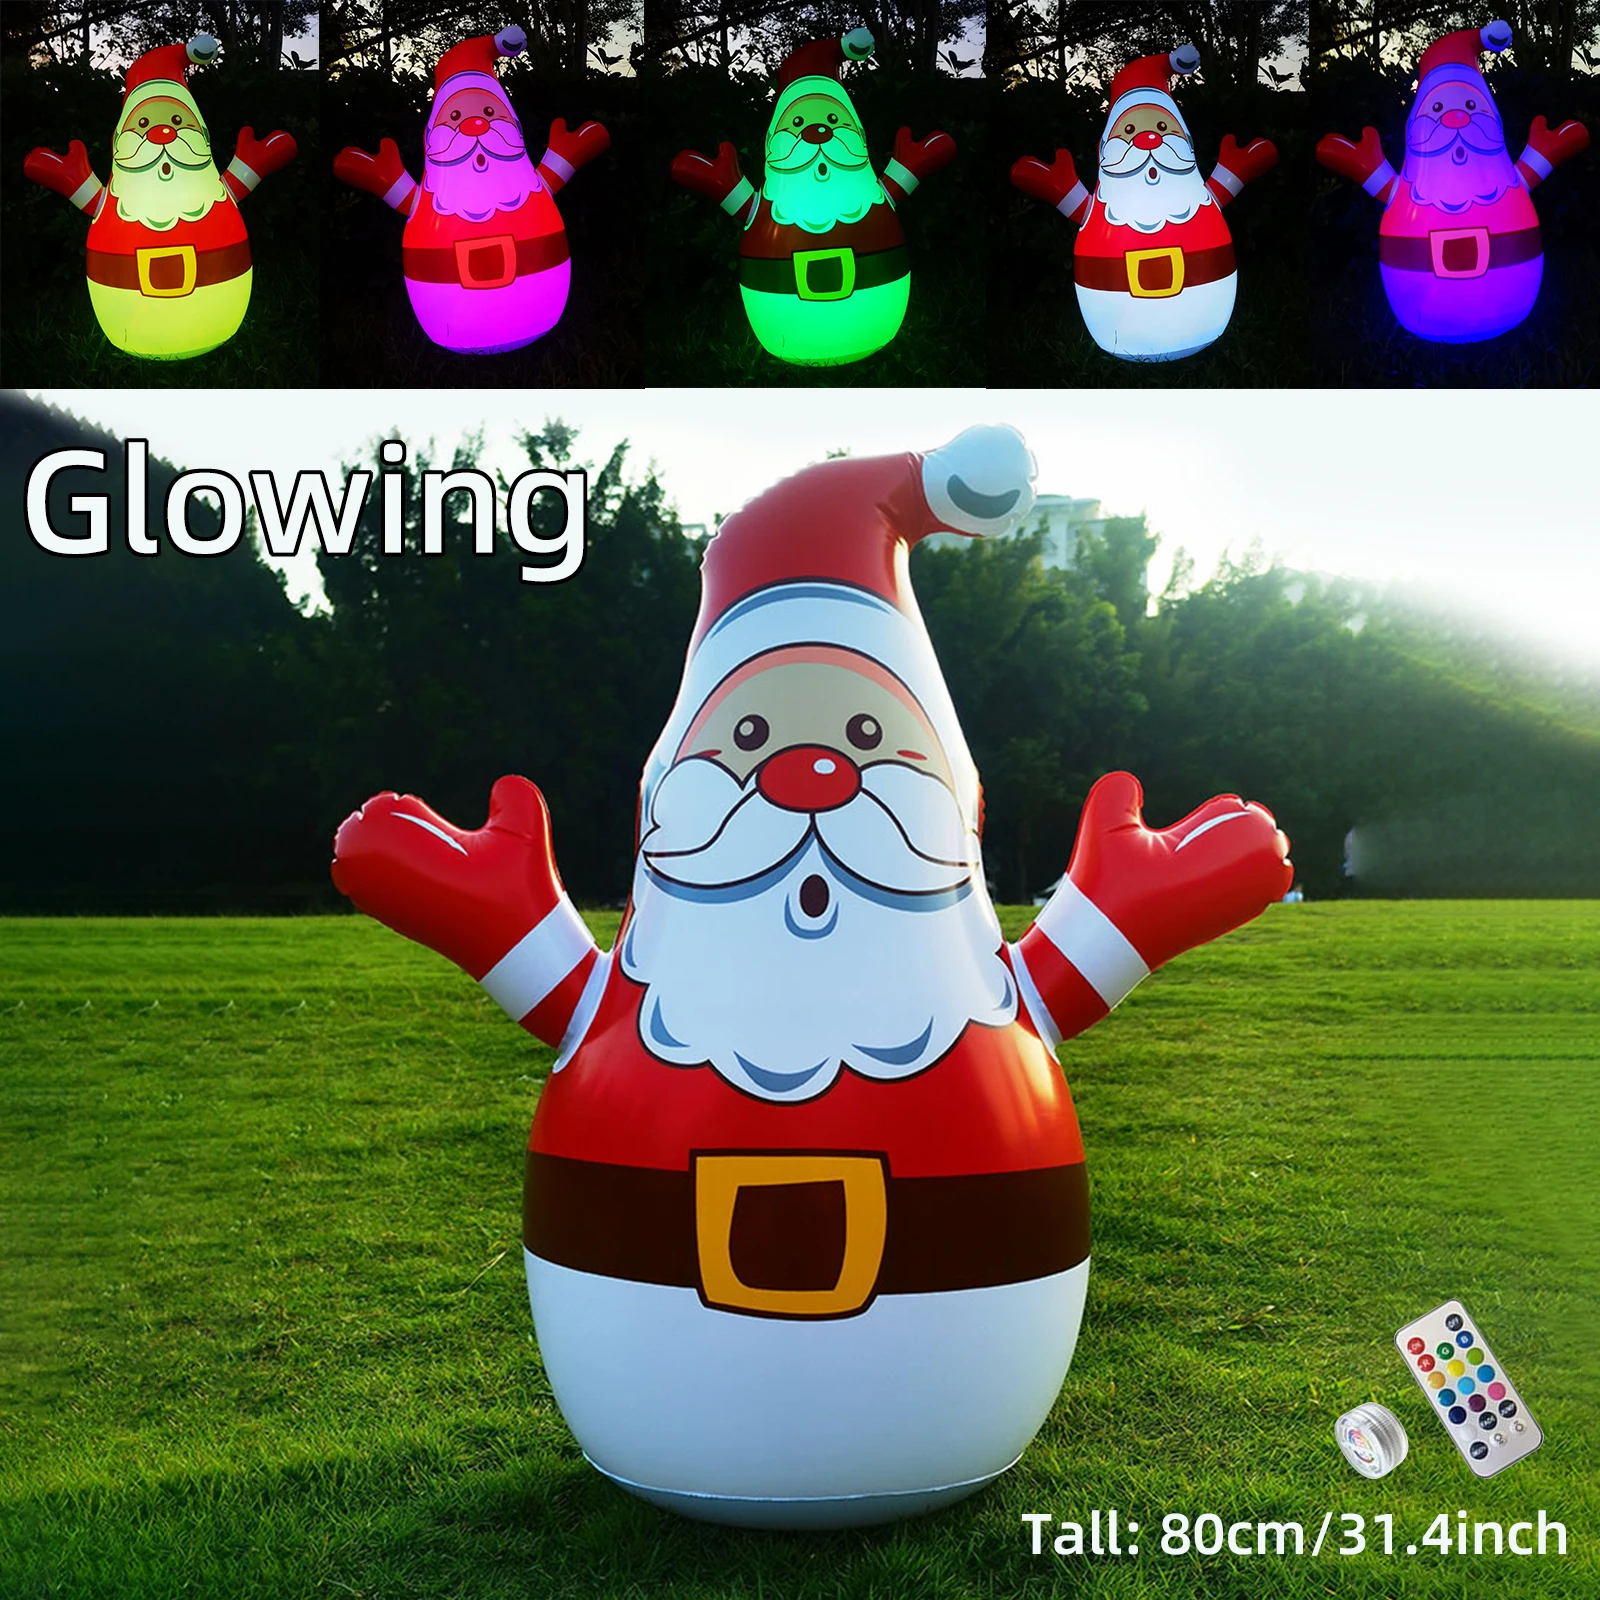 

80cm Inflatable Santa Claus Snowman Glowing Merry Christmas Outdoor Decoration 13 Colors Led Light Up Giant Party New Year